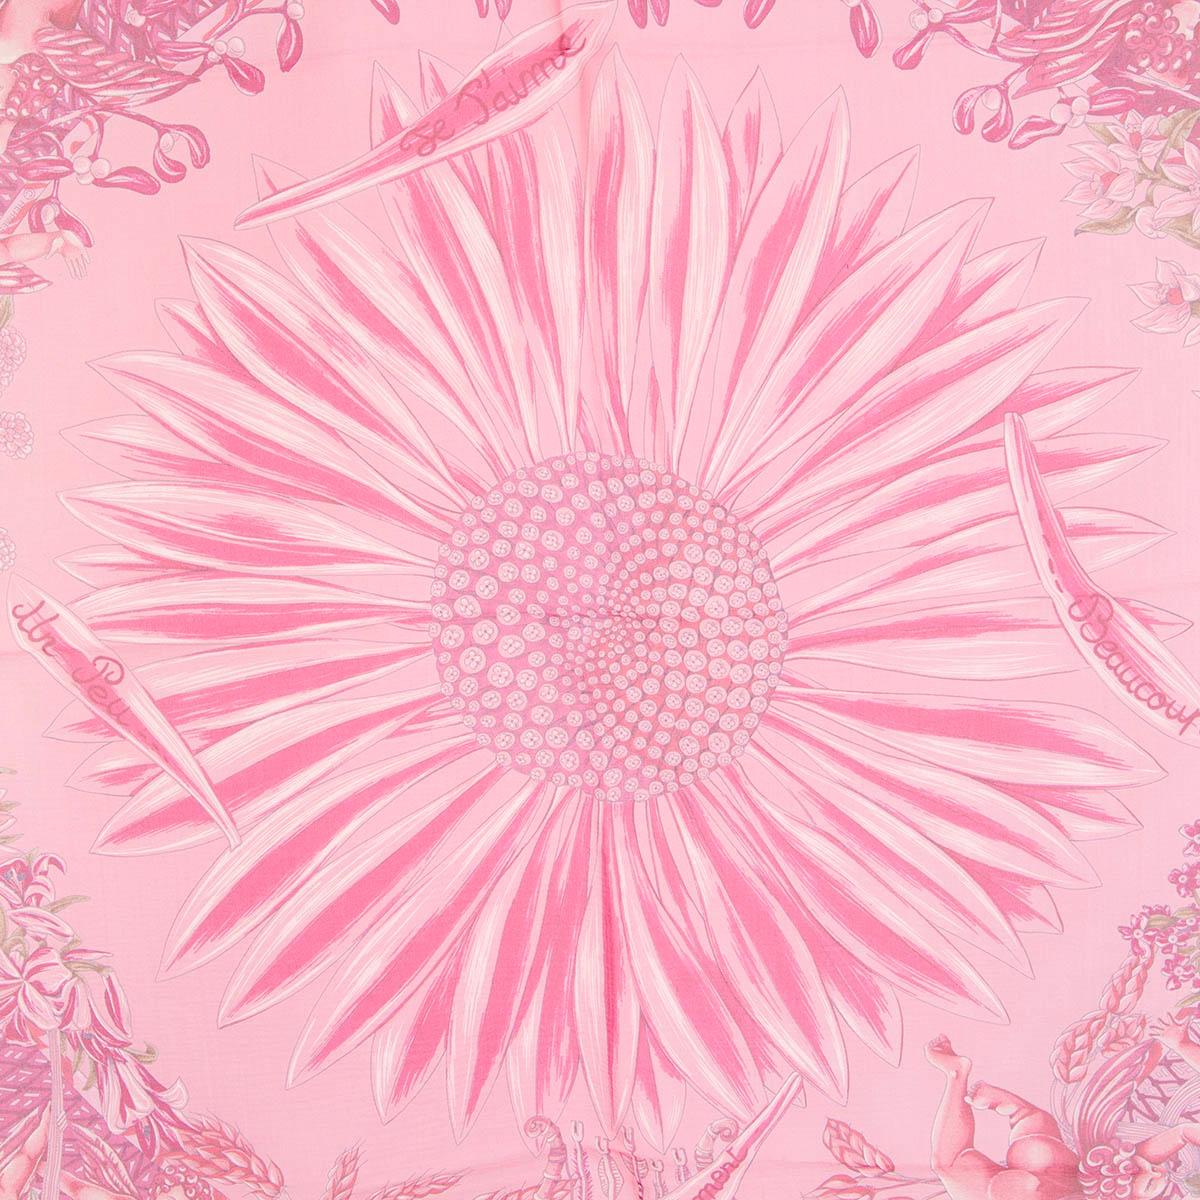 100% authentic Hermès Amours 90 Mousseline scarf by Annie Faivre in rose pink silk (100%) with details in pink, magenta and taupe with large daisy, angel and bell details. Has been worn and is in excellent condition. 

Measurements
Width	90cm